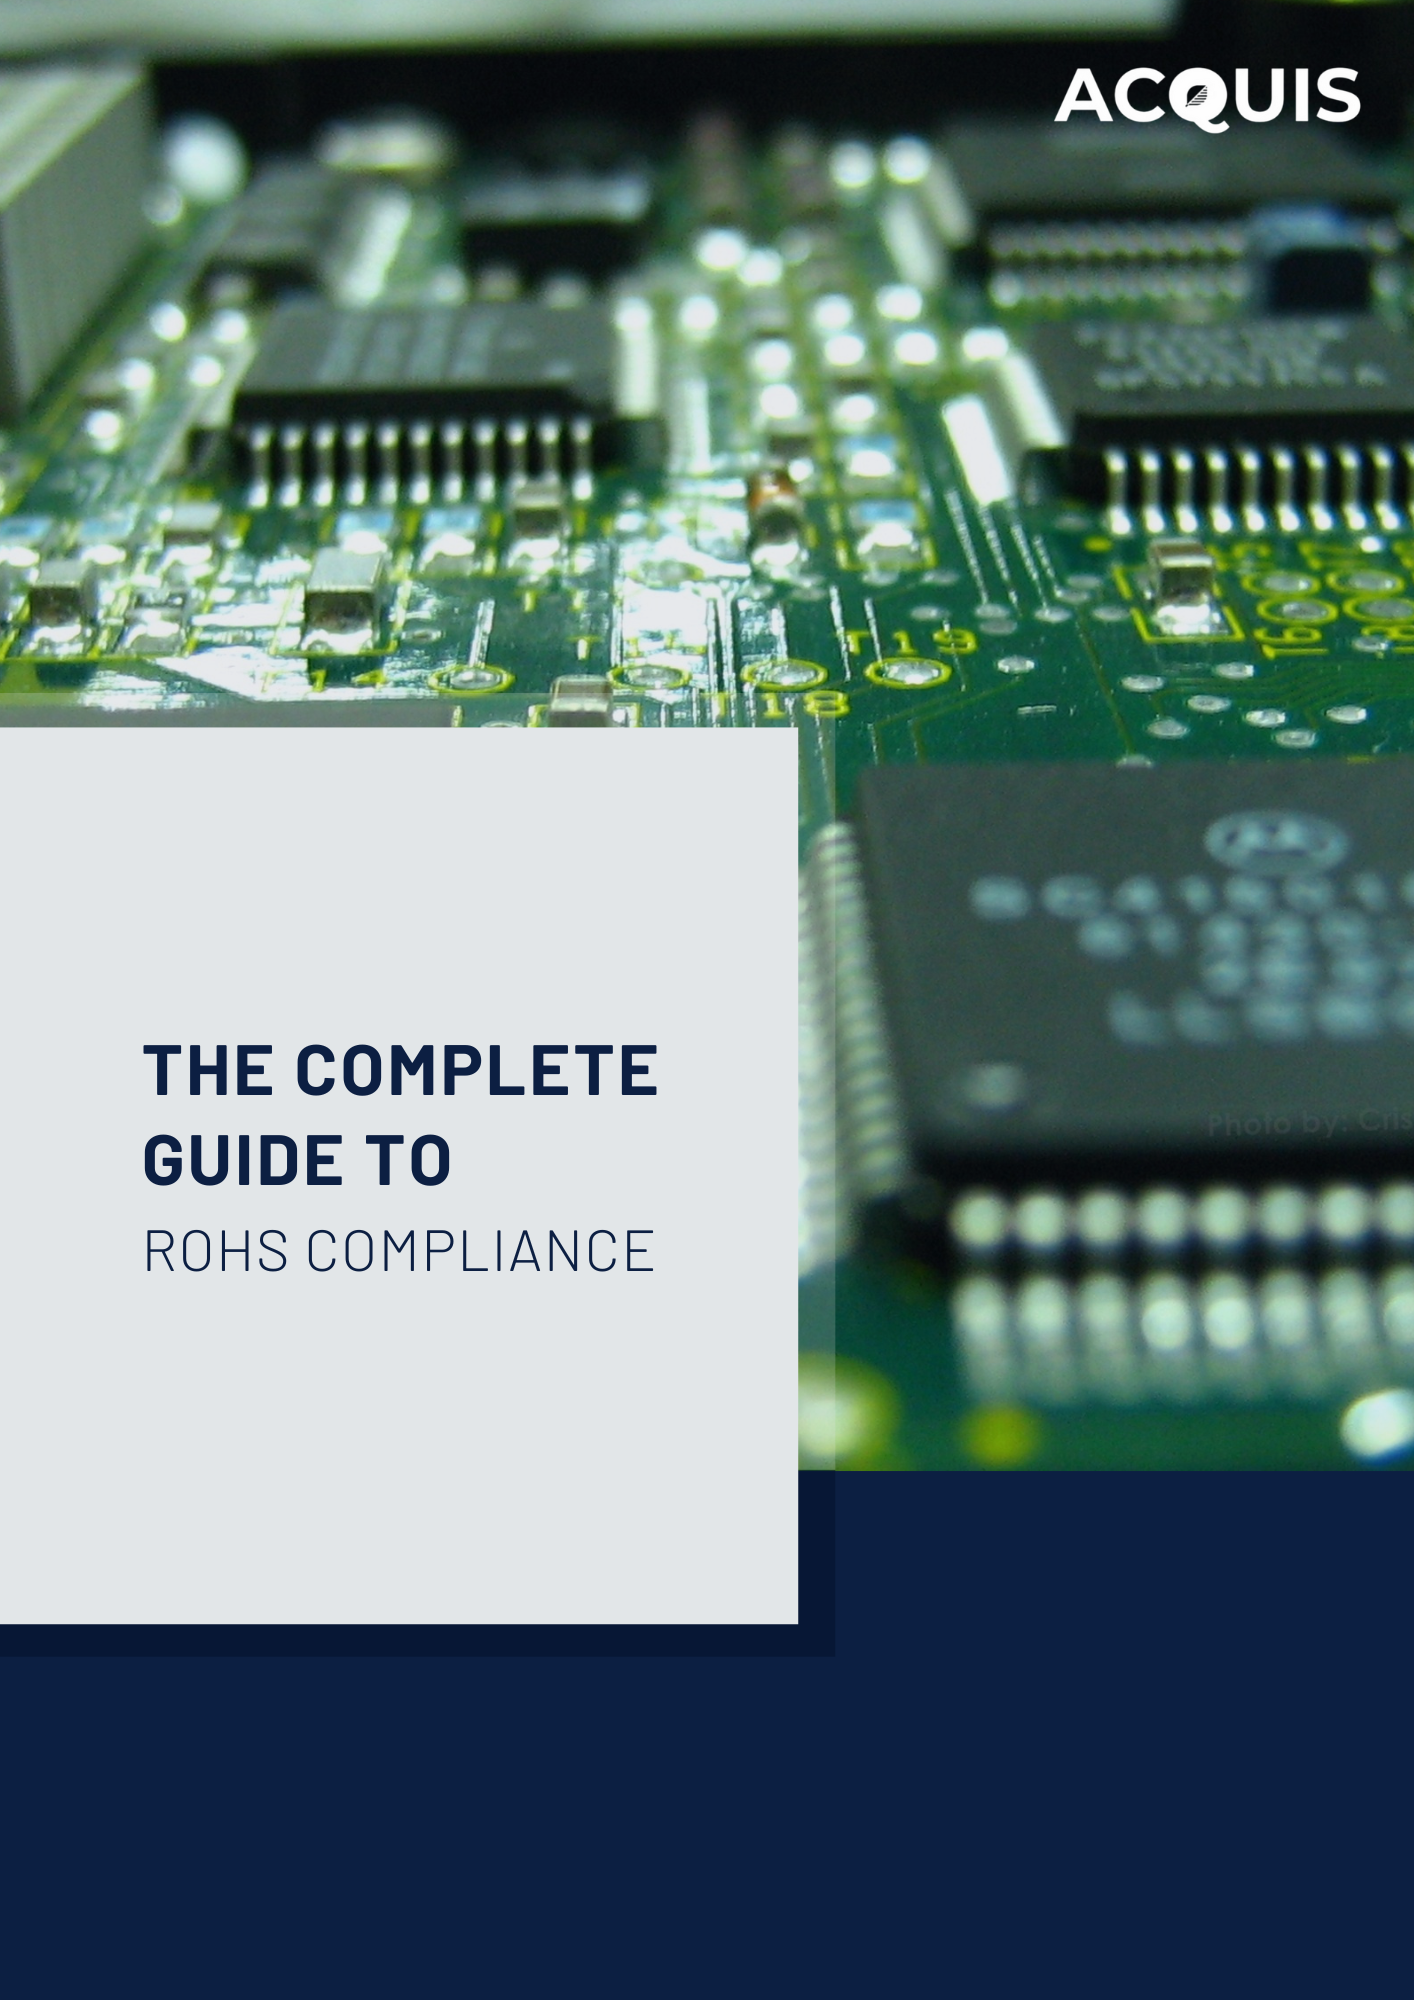 Get Your Hands on Our RoHS Compliance Guide